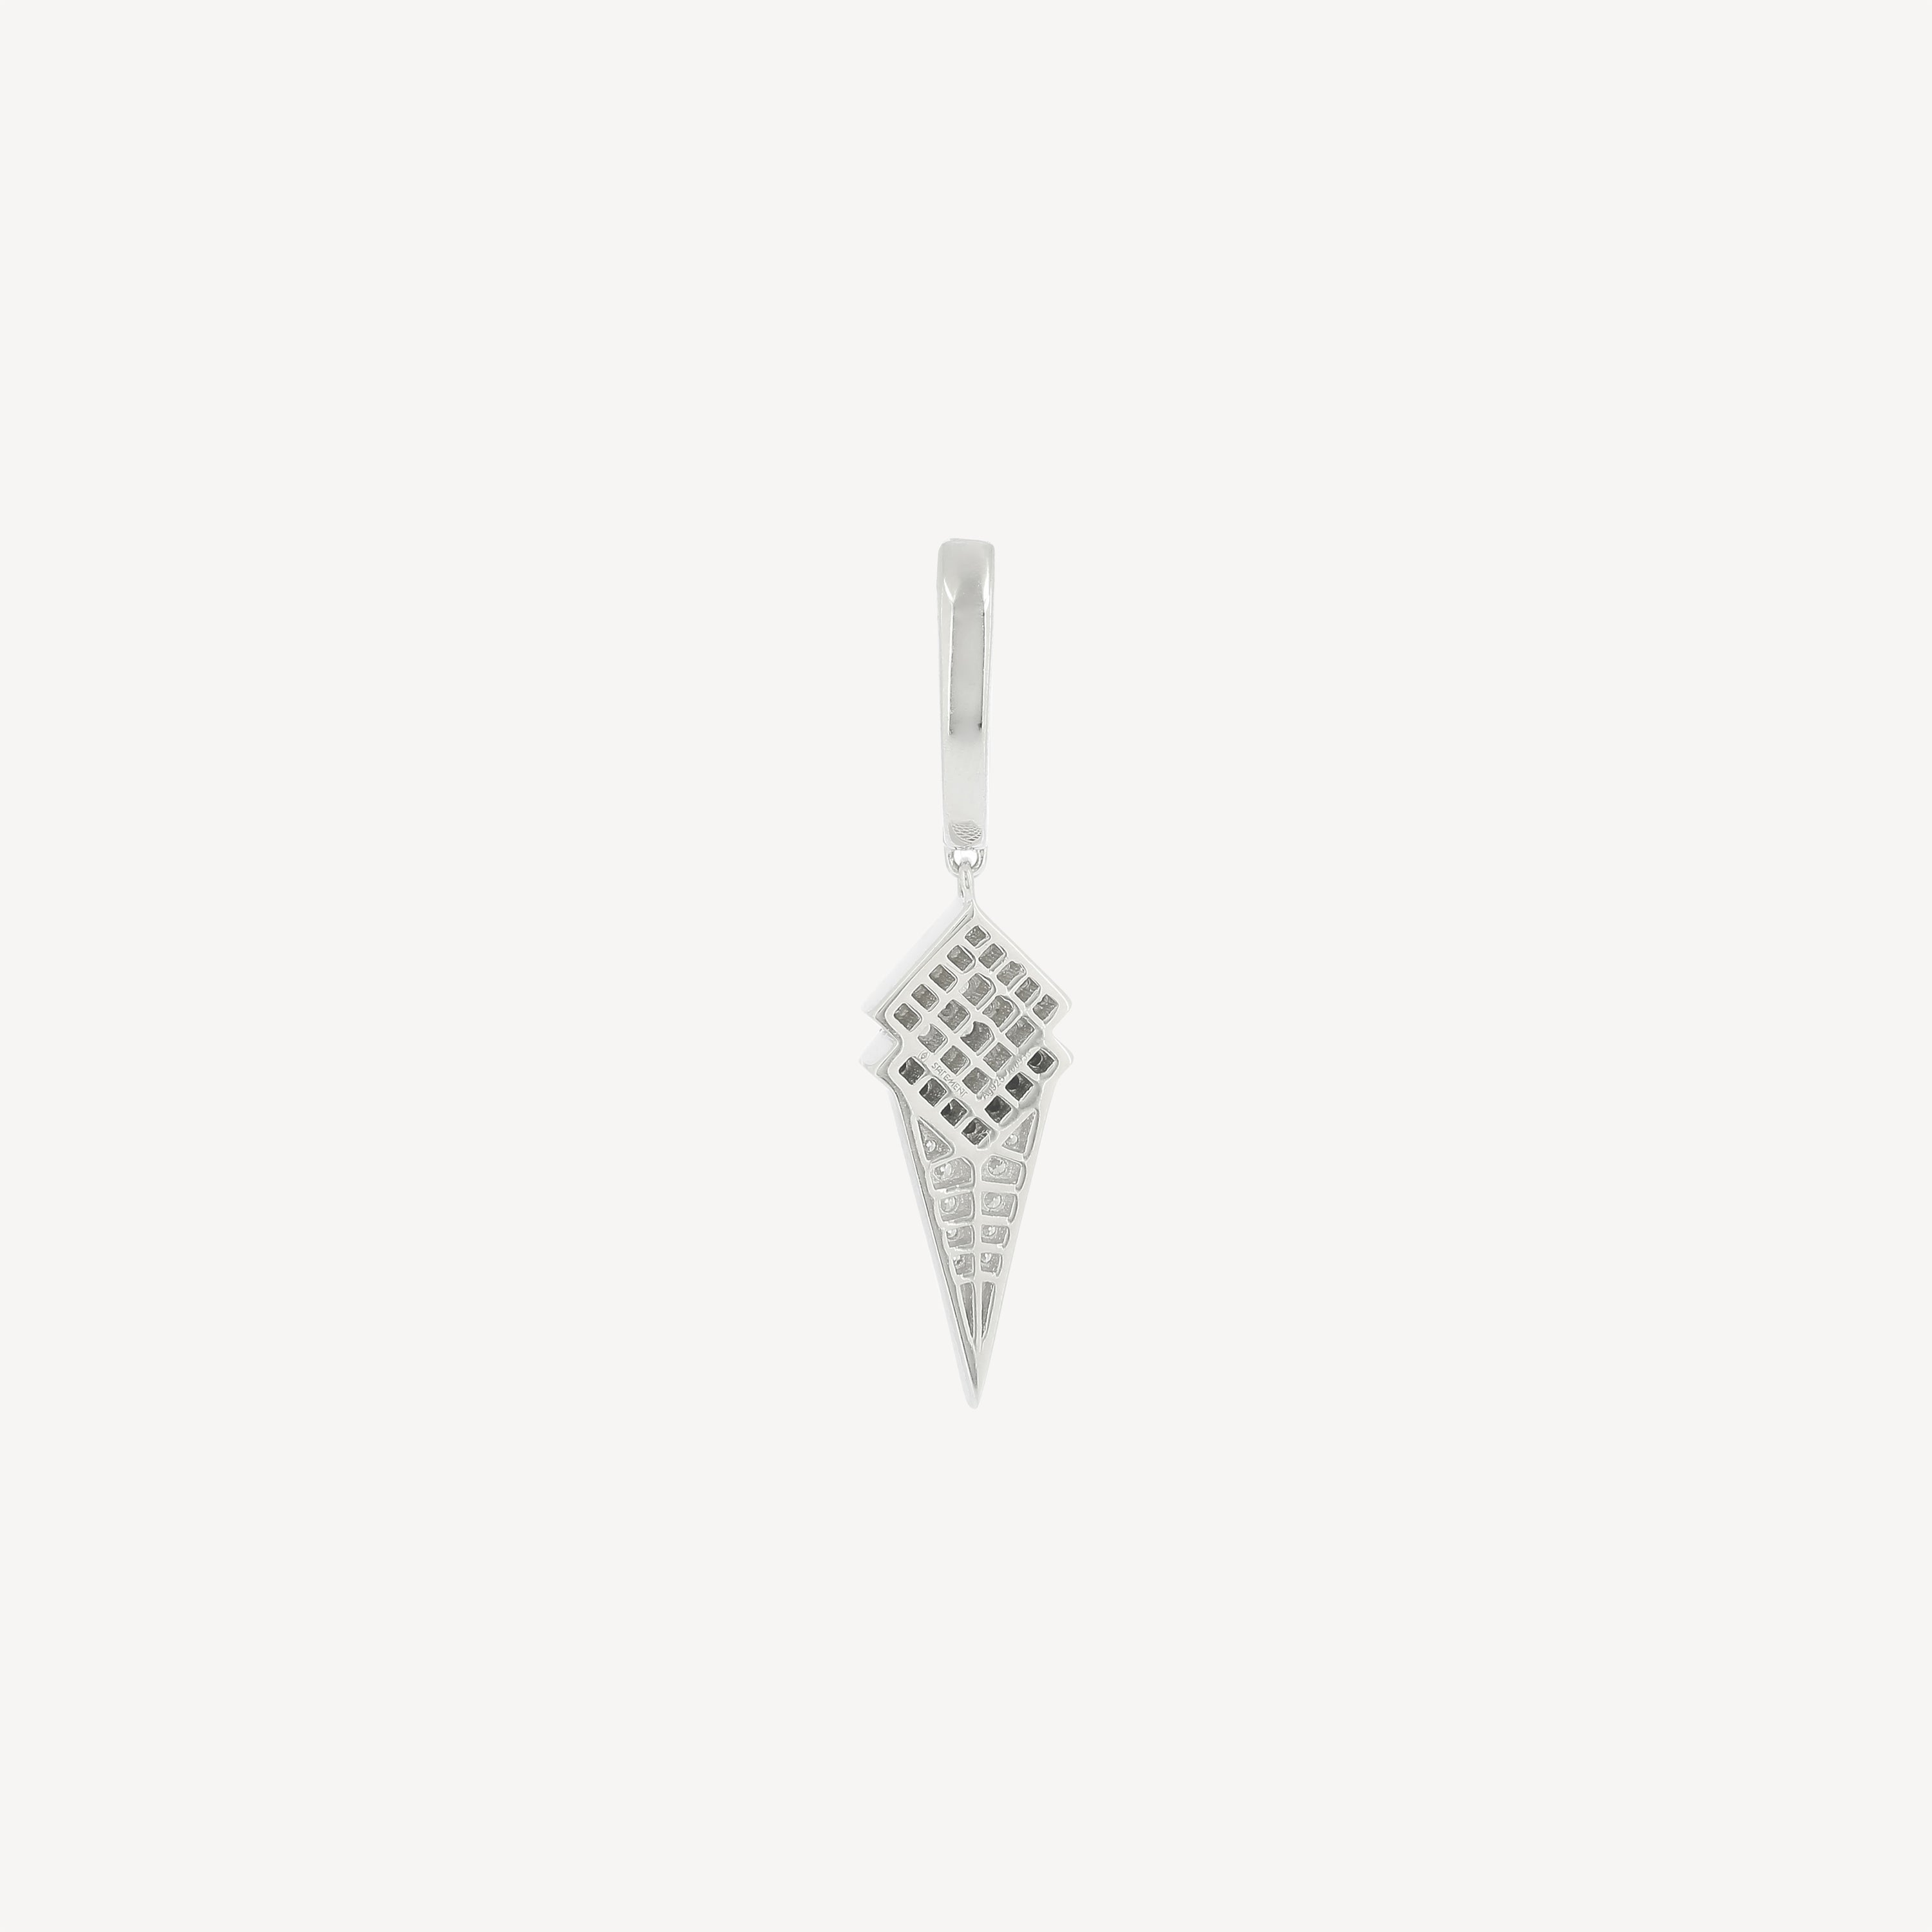 Gradient and Silver Stairway Cone Earring